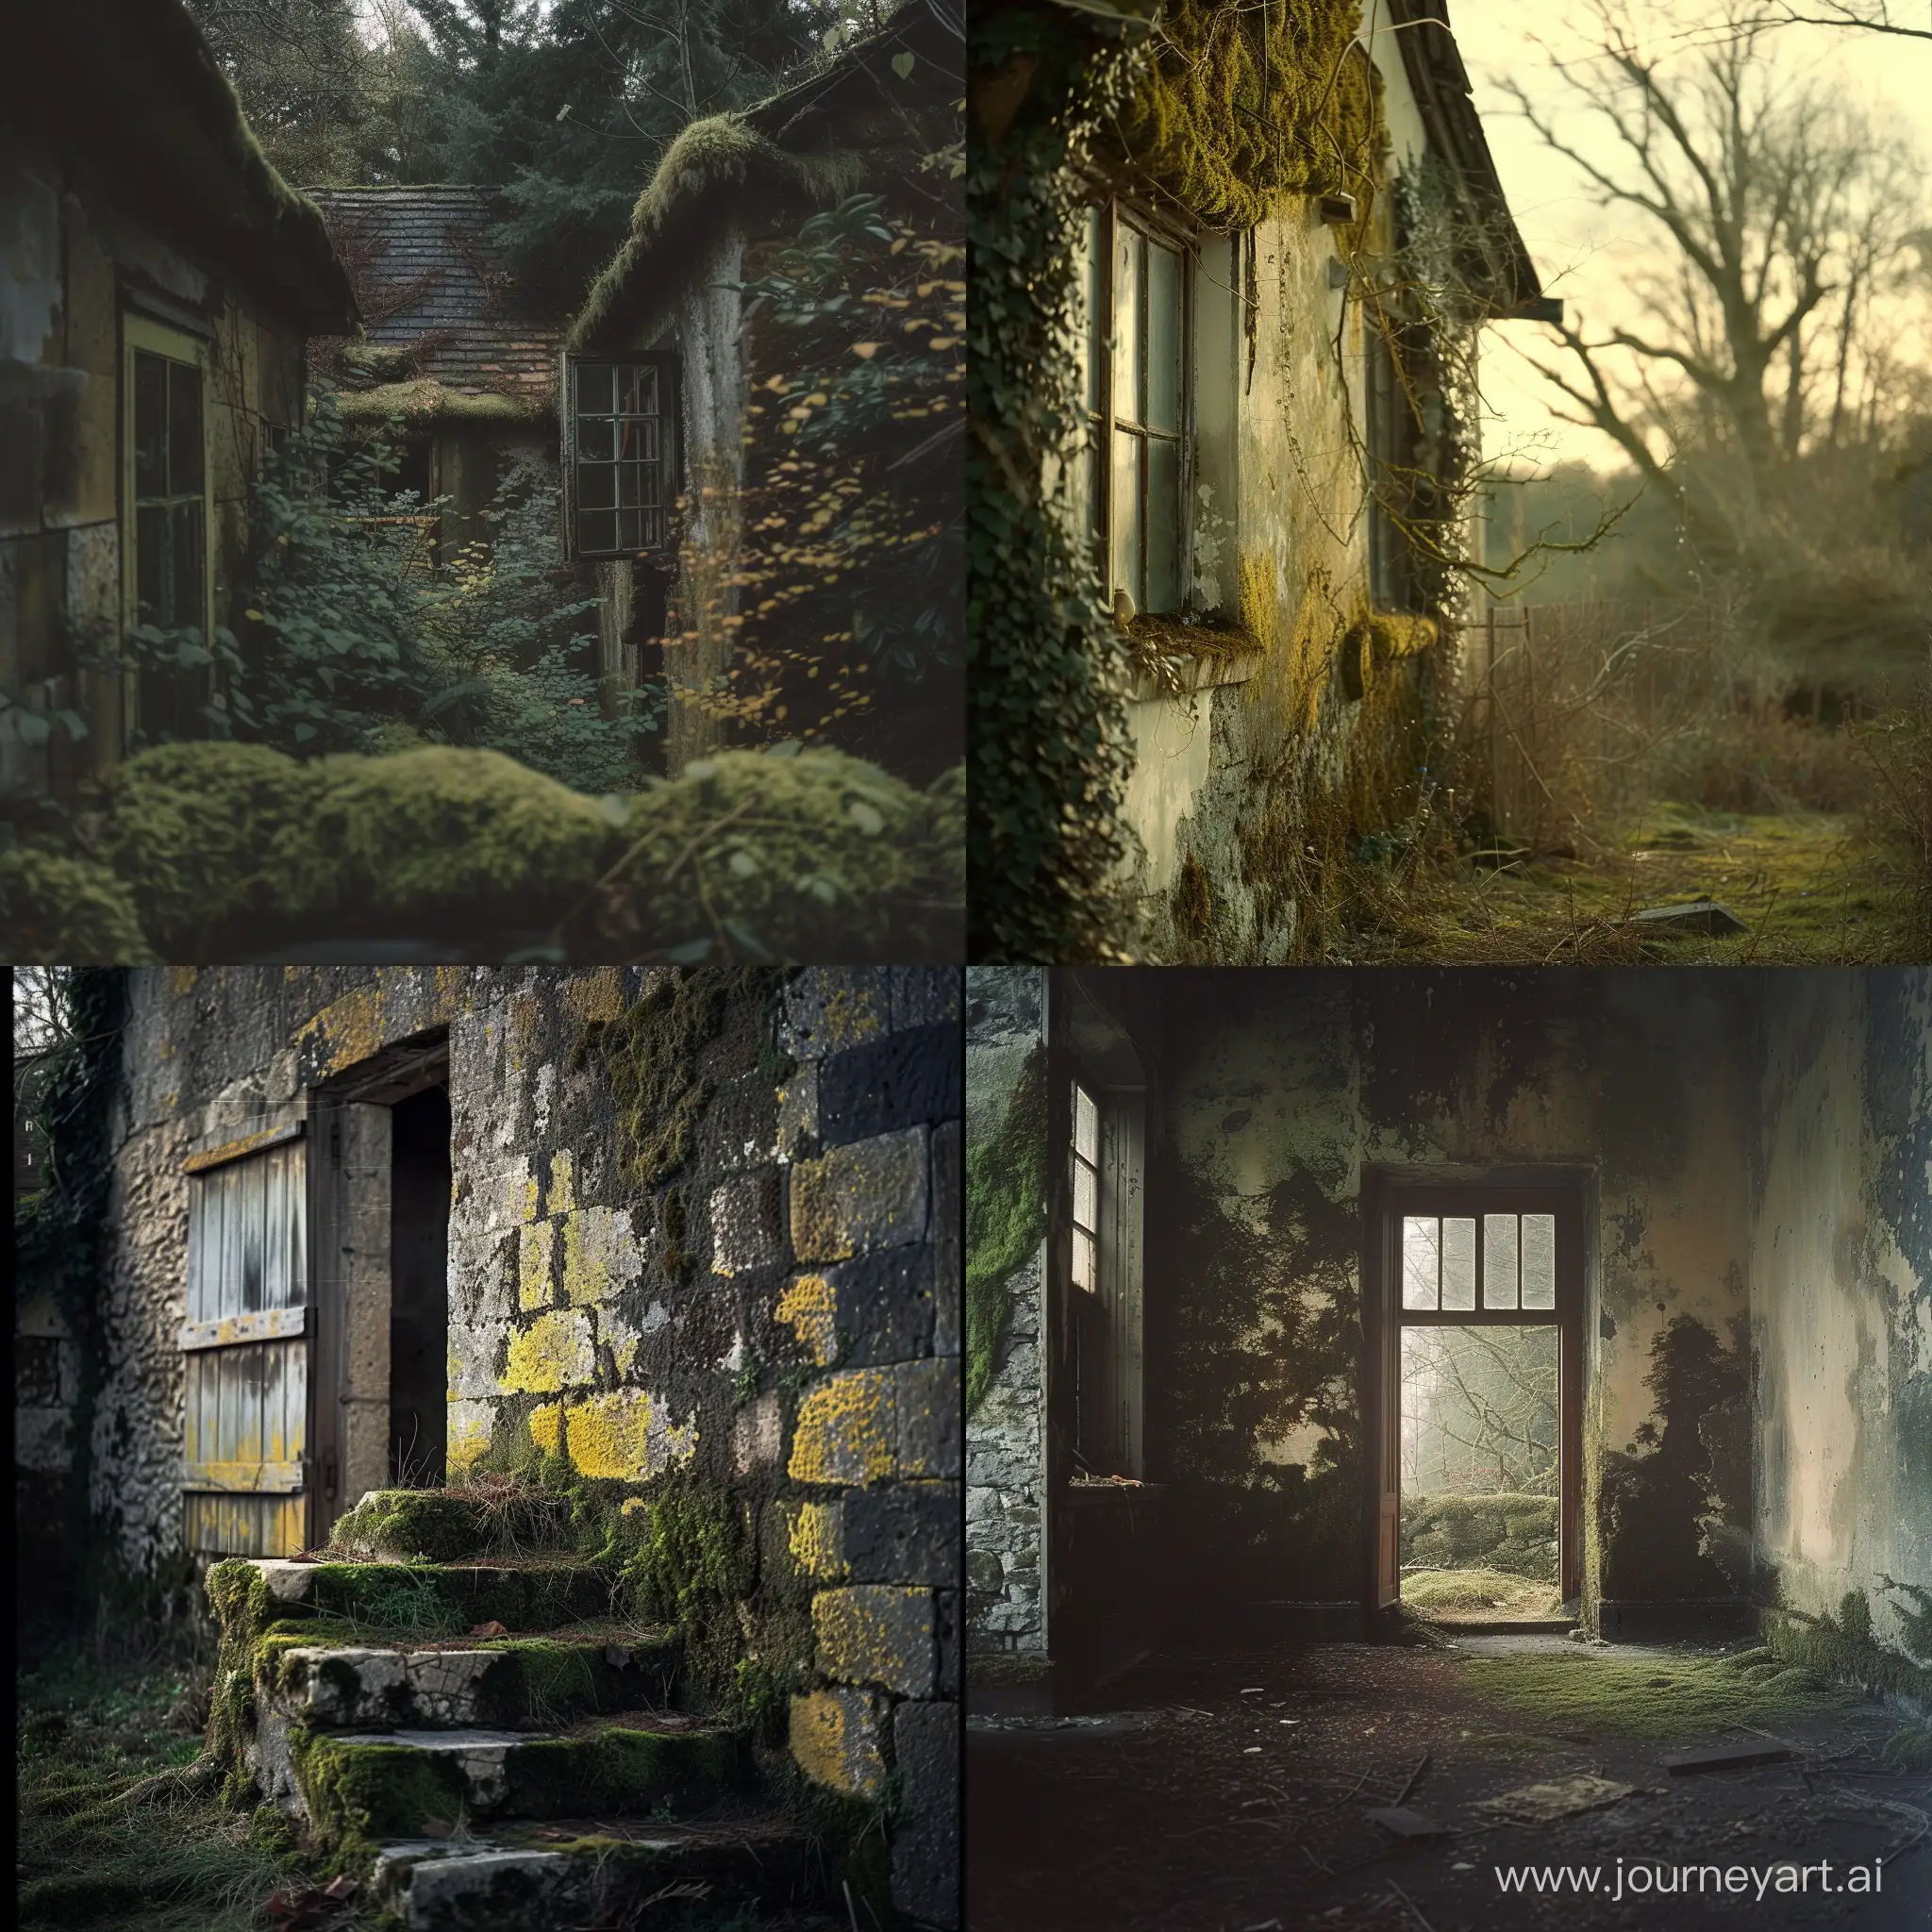 Rustic-Country-House-with-Mossy-Walls-Under-Daylight-Vintage-Cinematic-View